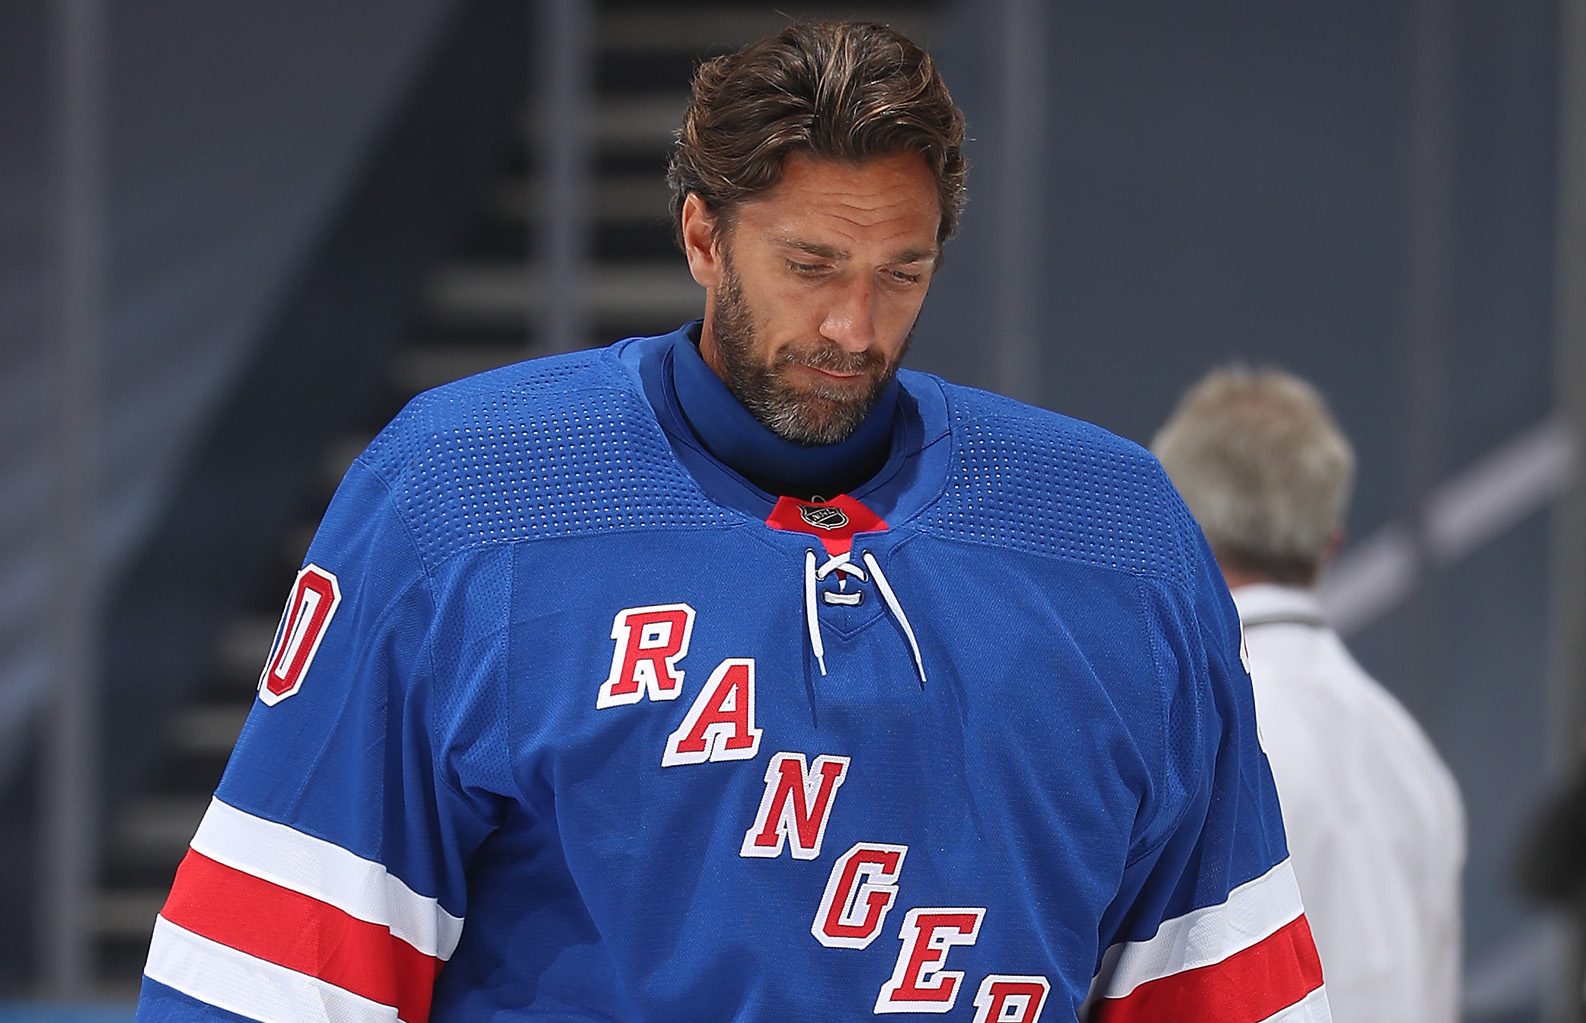 Twitter Reacts To News Of Henrik Lundqvist Missing The 2021 NHL Season